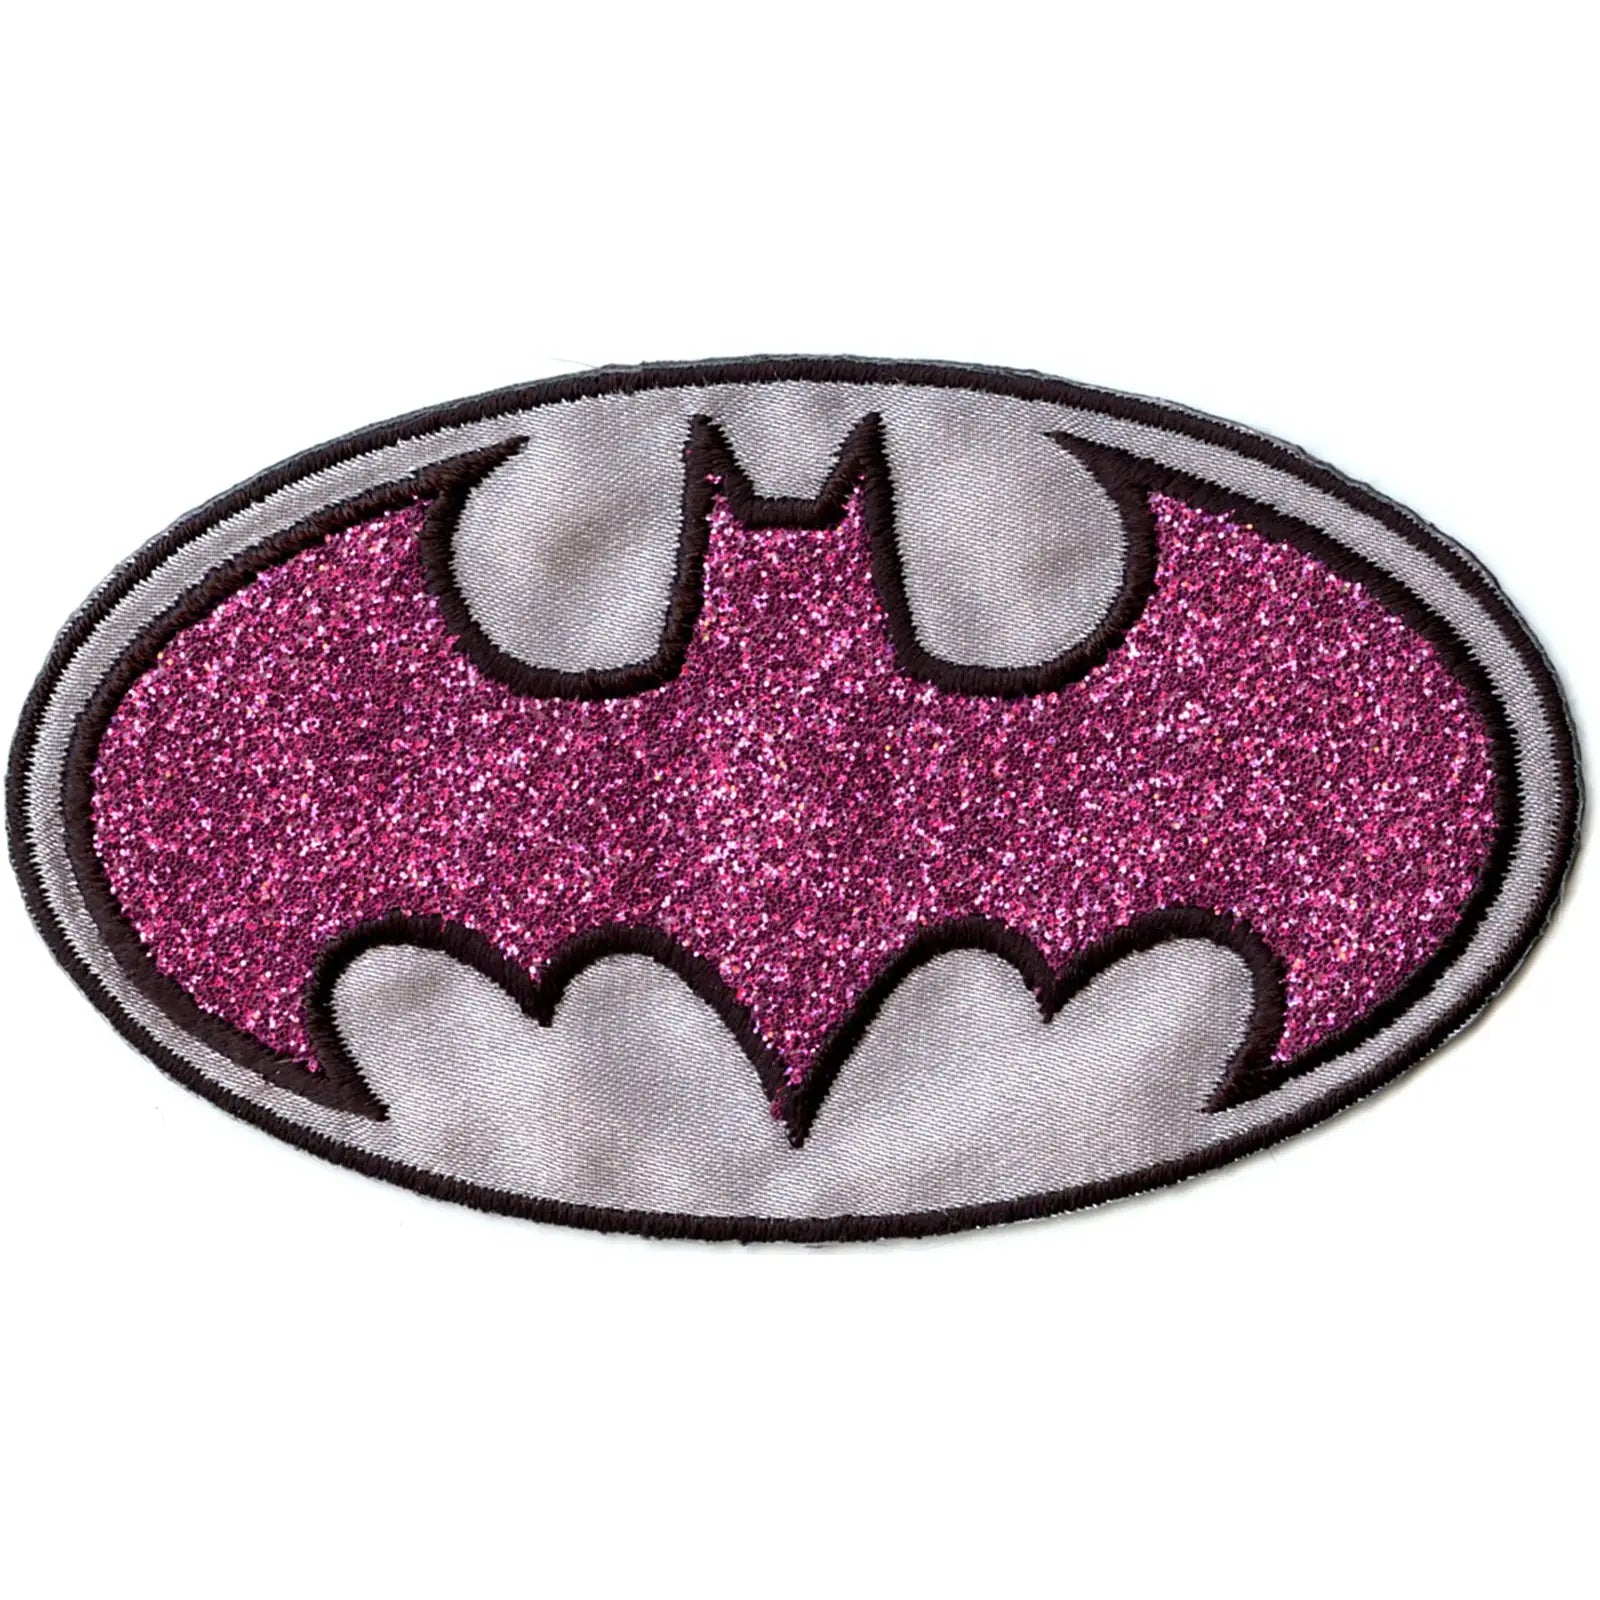 Dc Comics Batgirl Pink Shimmer Iron on Applique Patch 